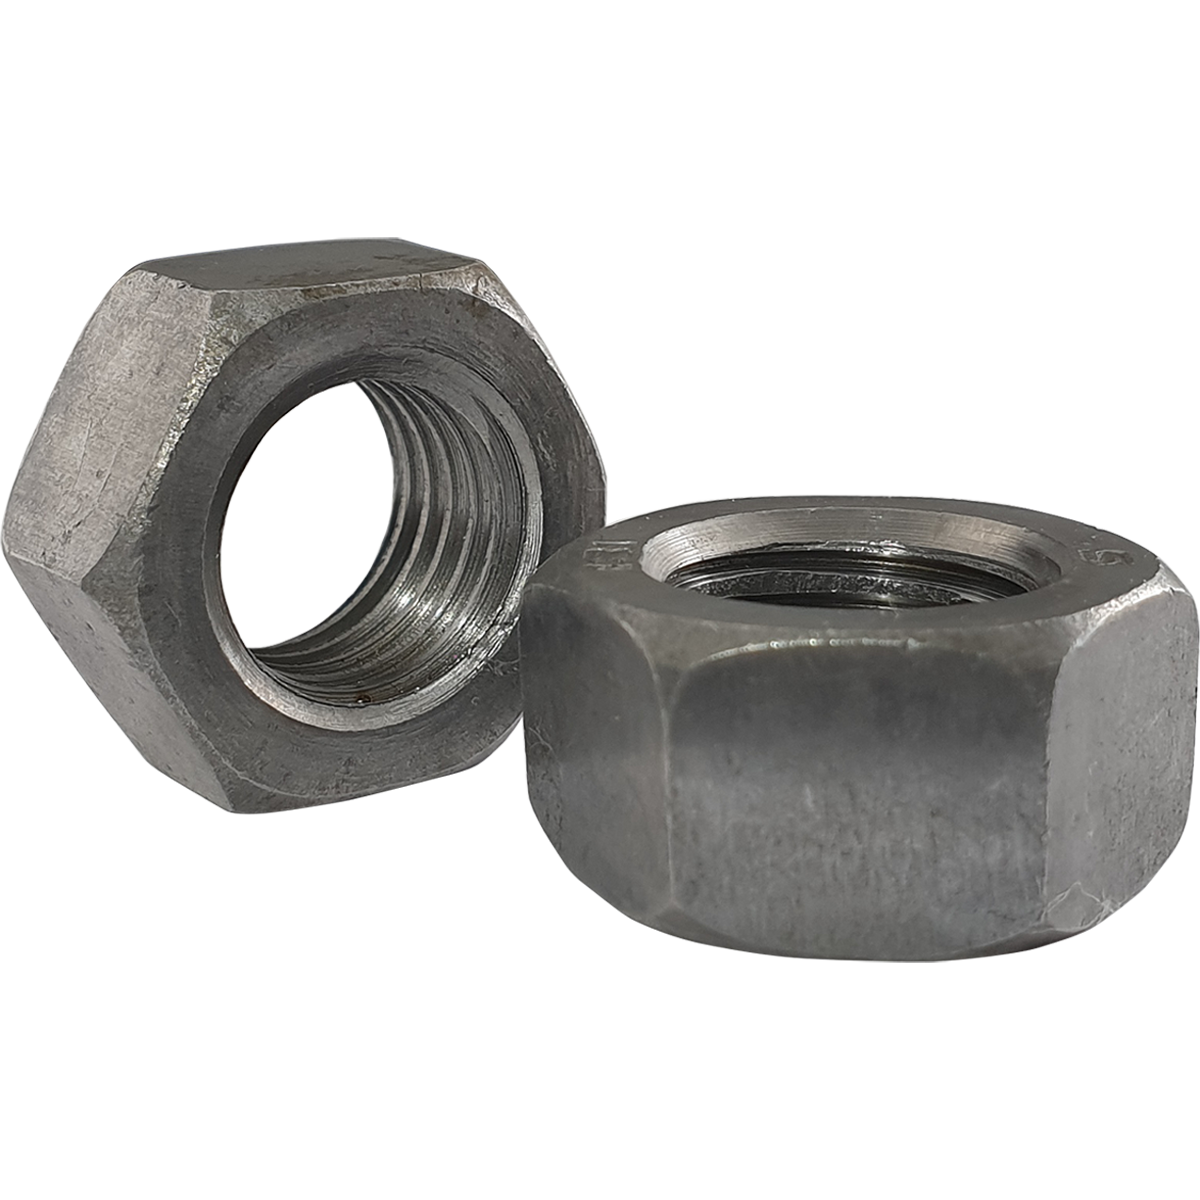 Self-colour, hex nuts, also known as hexagon nuts, at competitive prices with bulk discounts available across the range at Fusion Fixings.